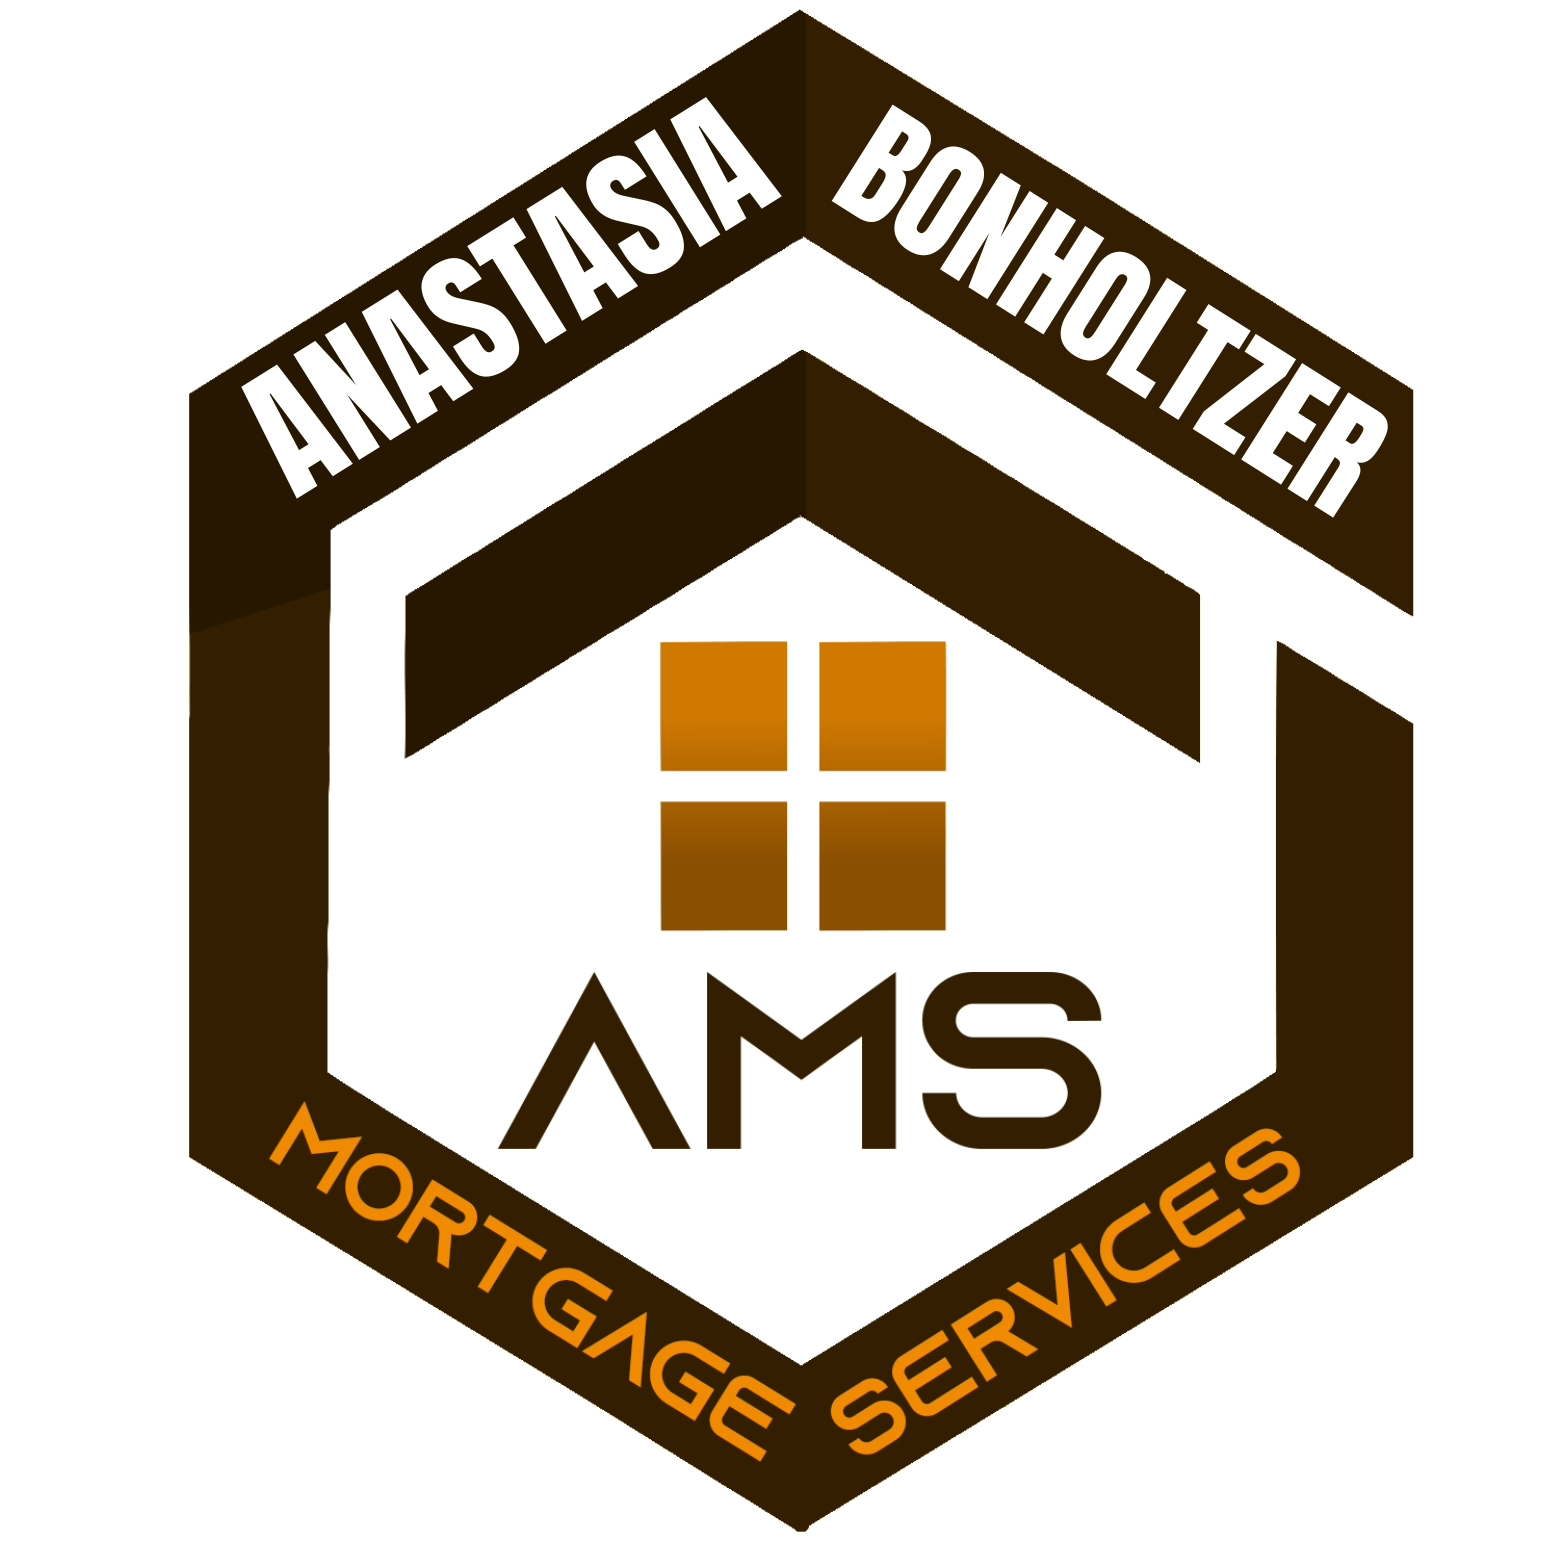 Anastasia Bonholtzer Loan Officer Powered by AMS Mortgage Services, Inc.